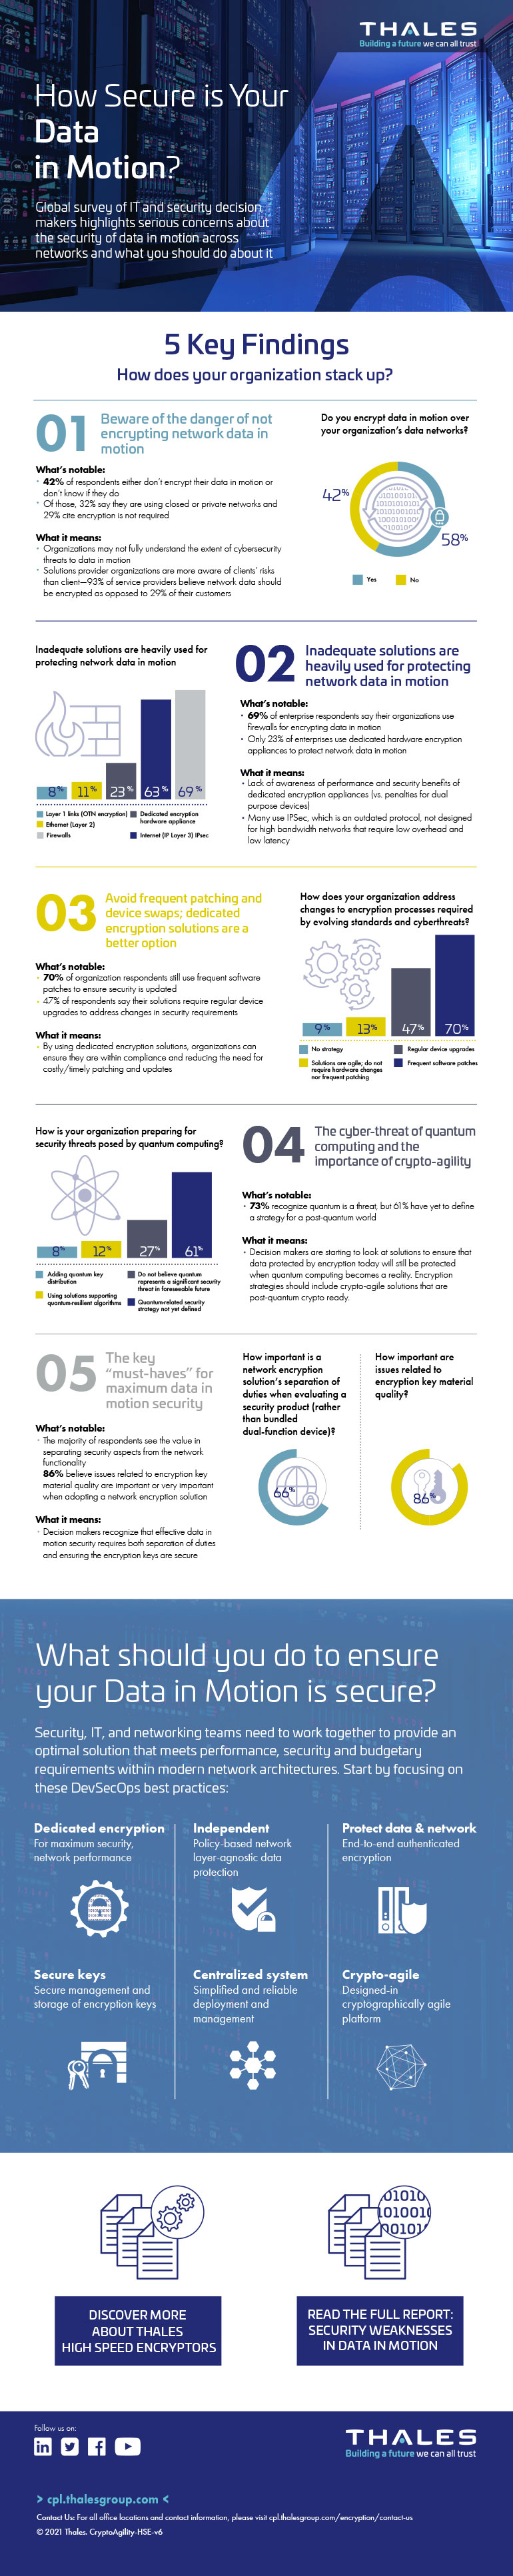 How Secure Is Your Data in Motion infographic